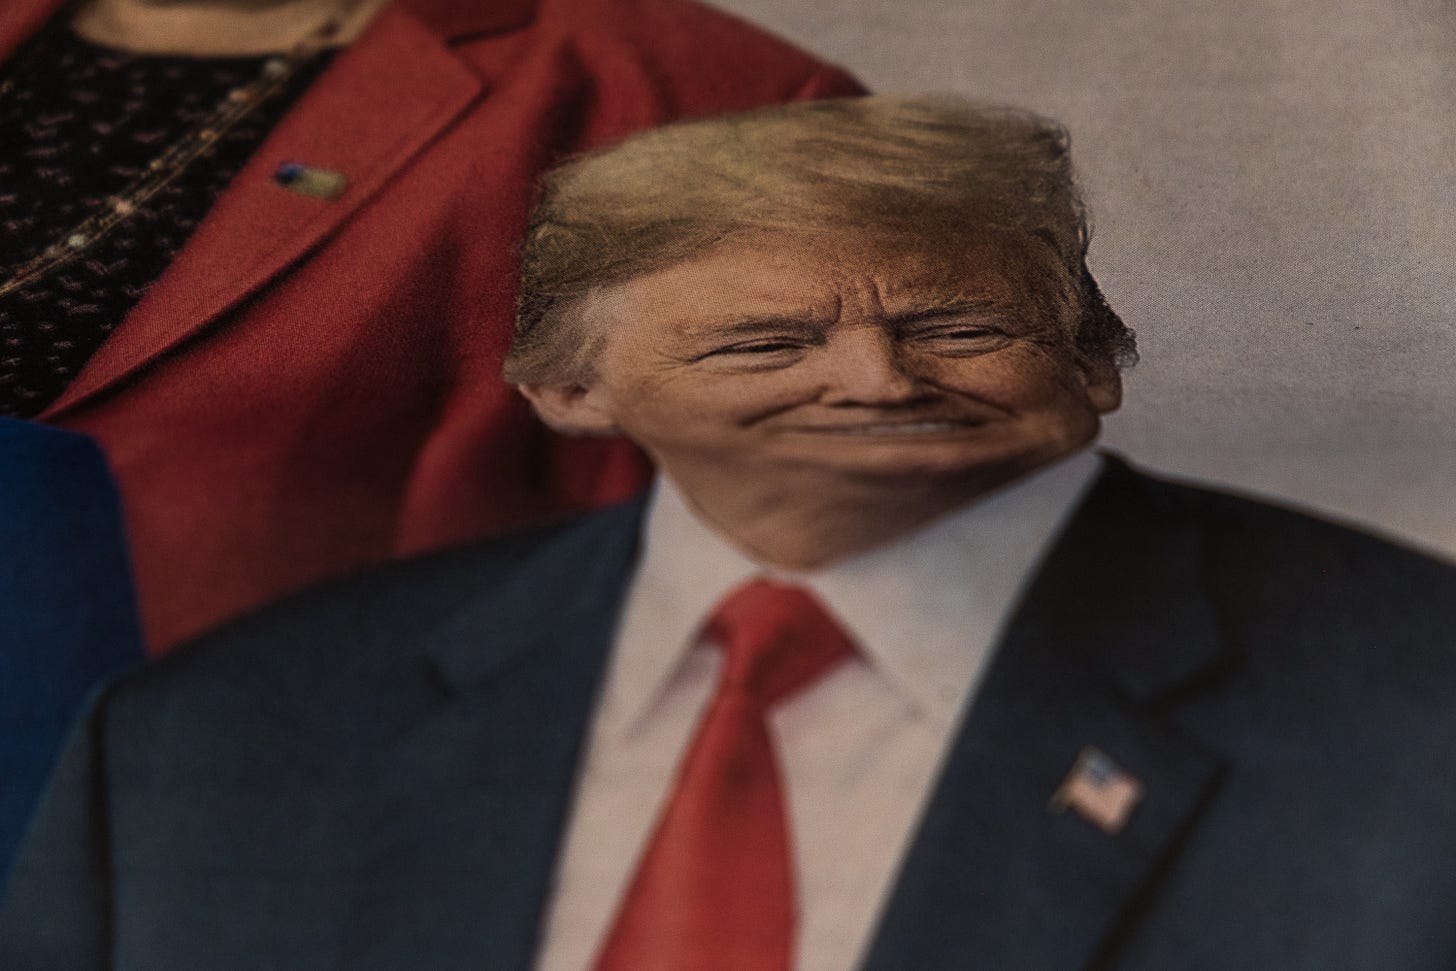 Distorted, wavy Image of an old Donald Trump in mental decline